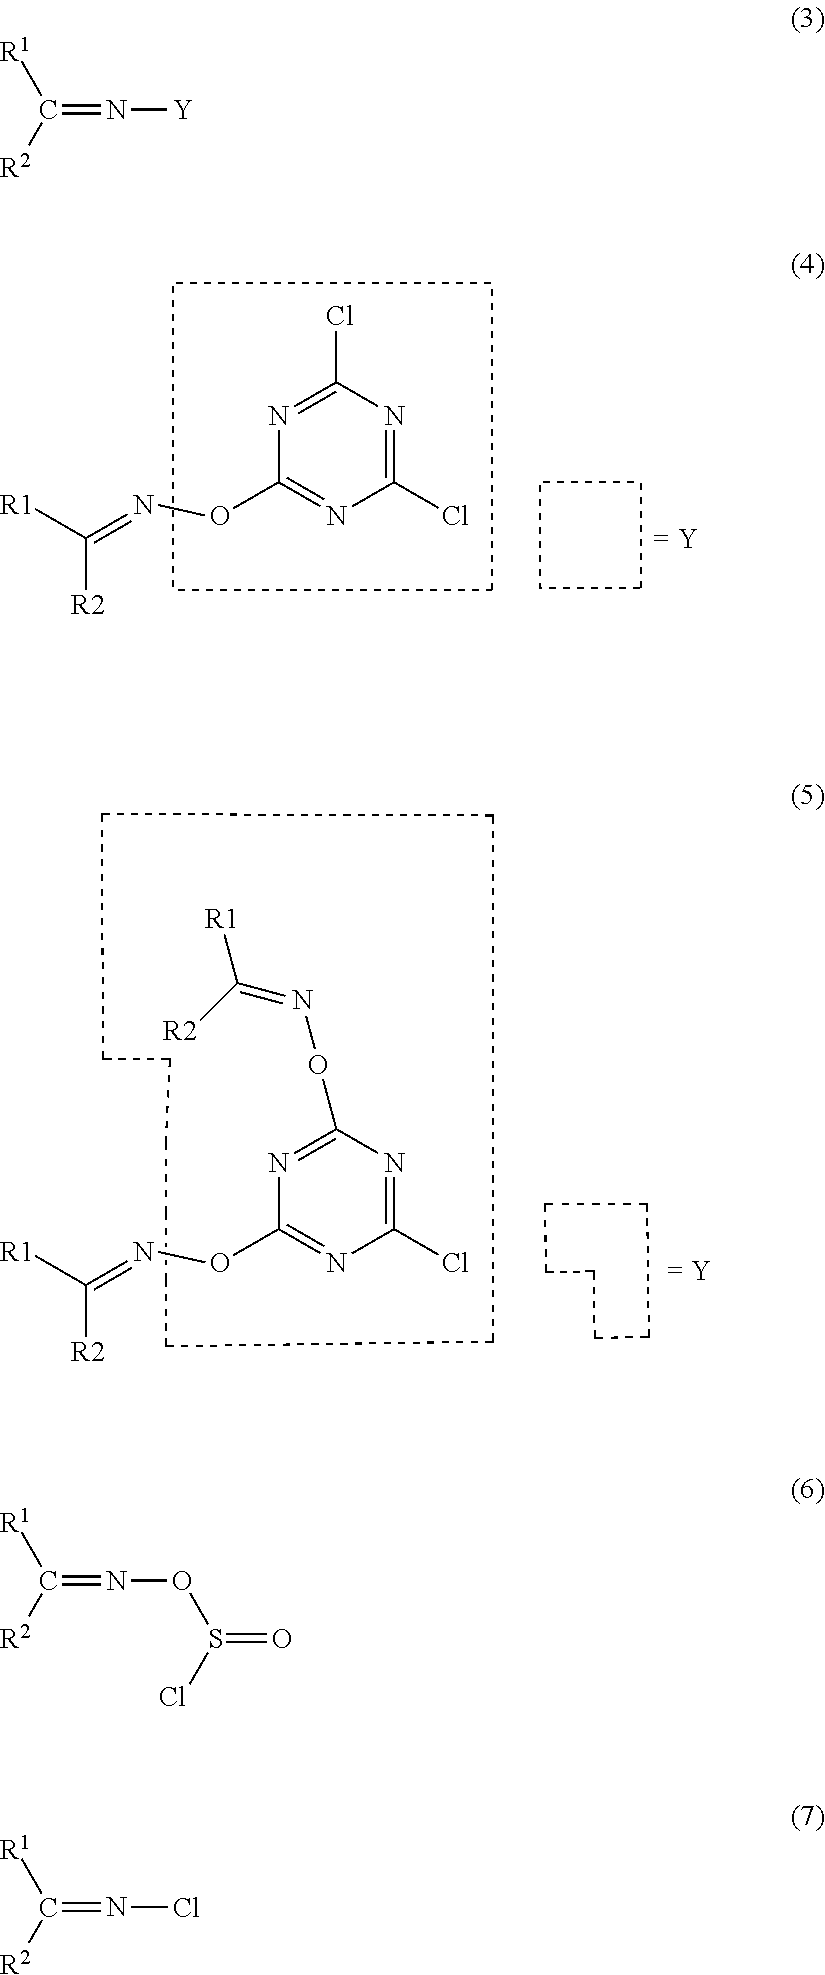 Method for producing amide compound